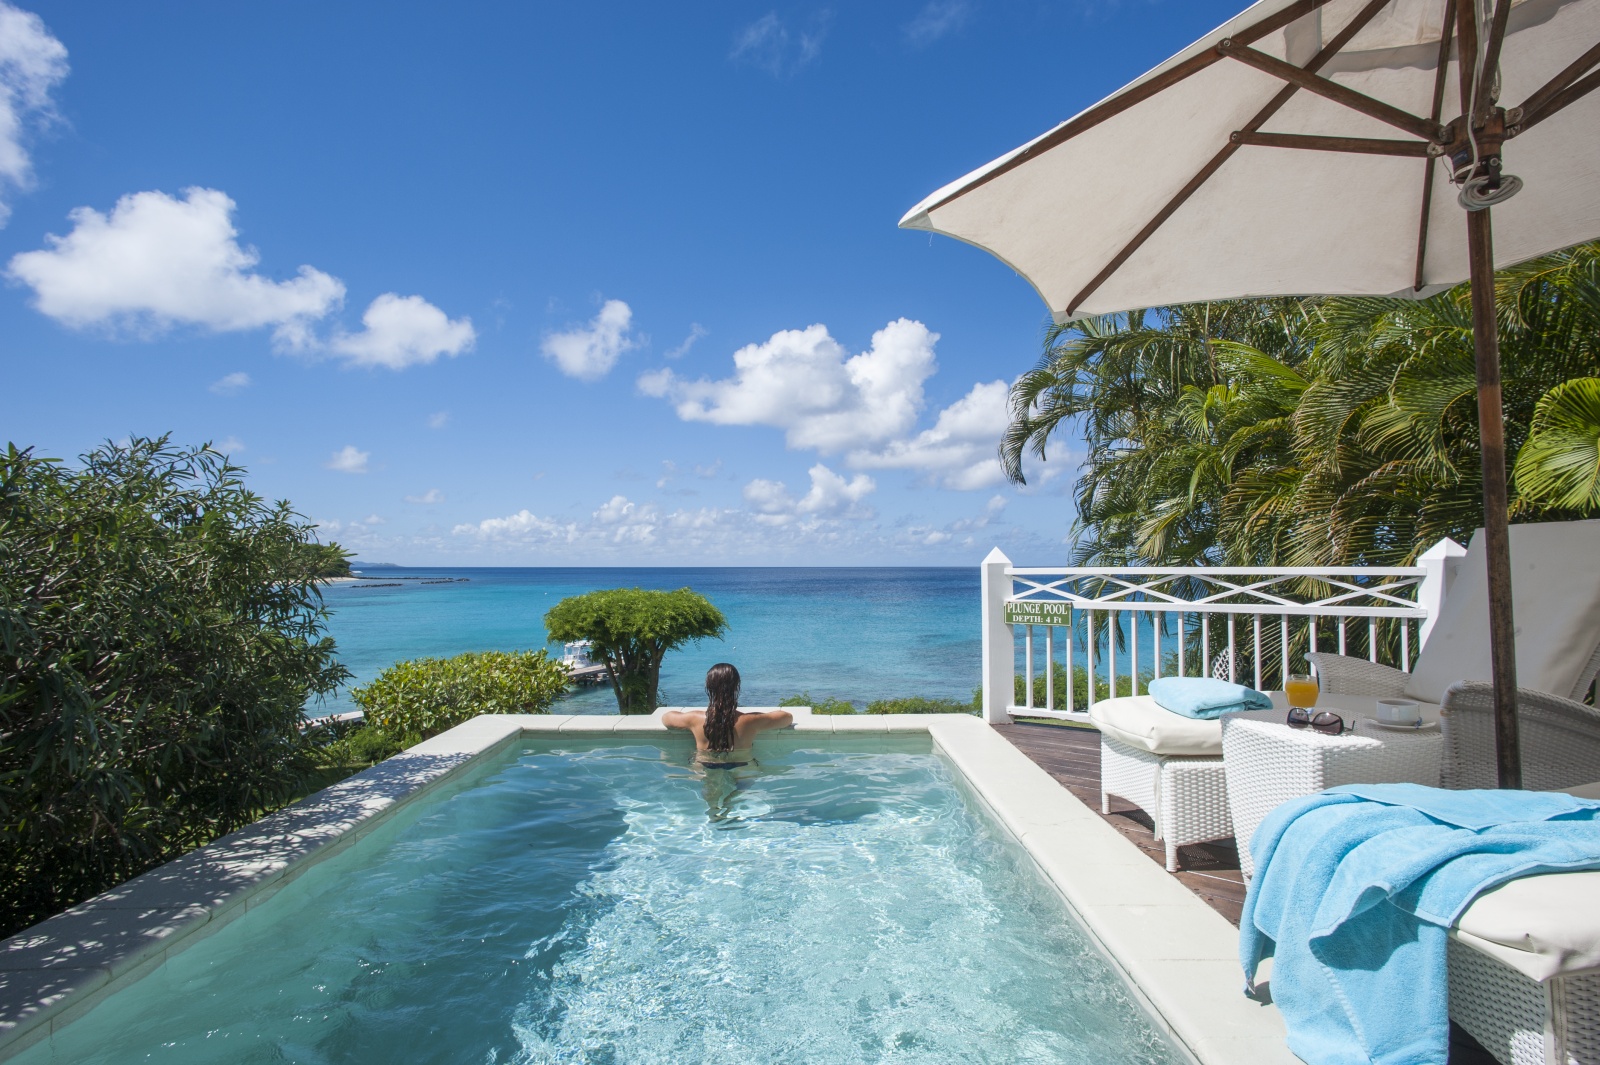 Mustique Island - Private Tropical Island With Luxury Villas